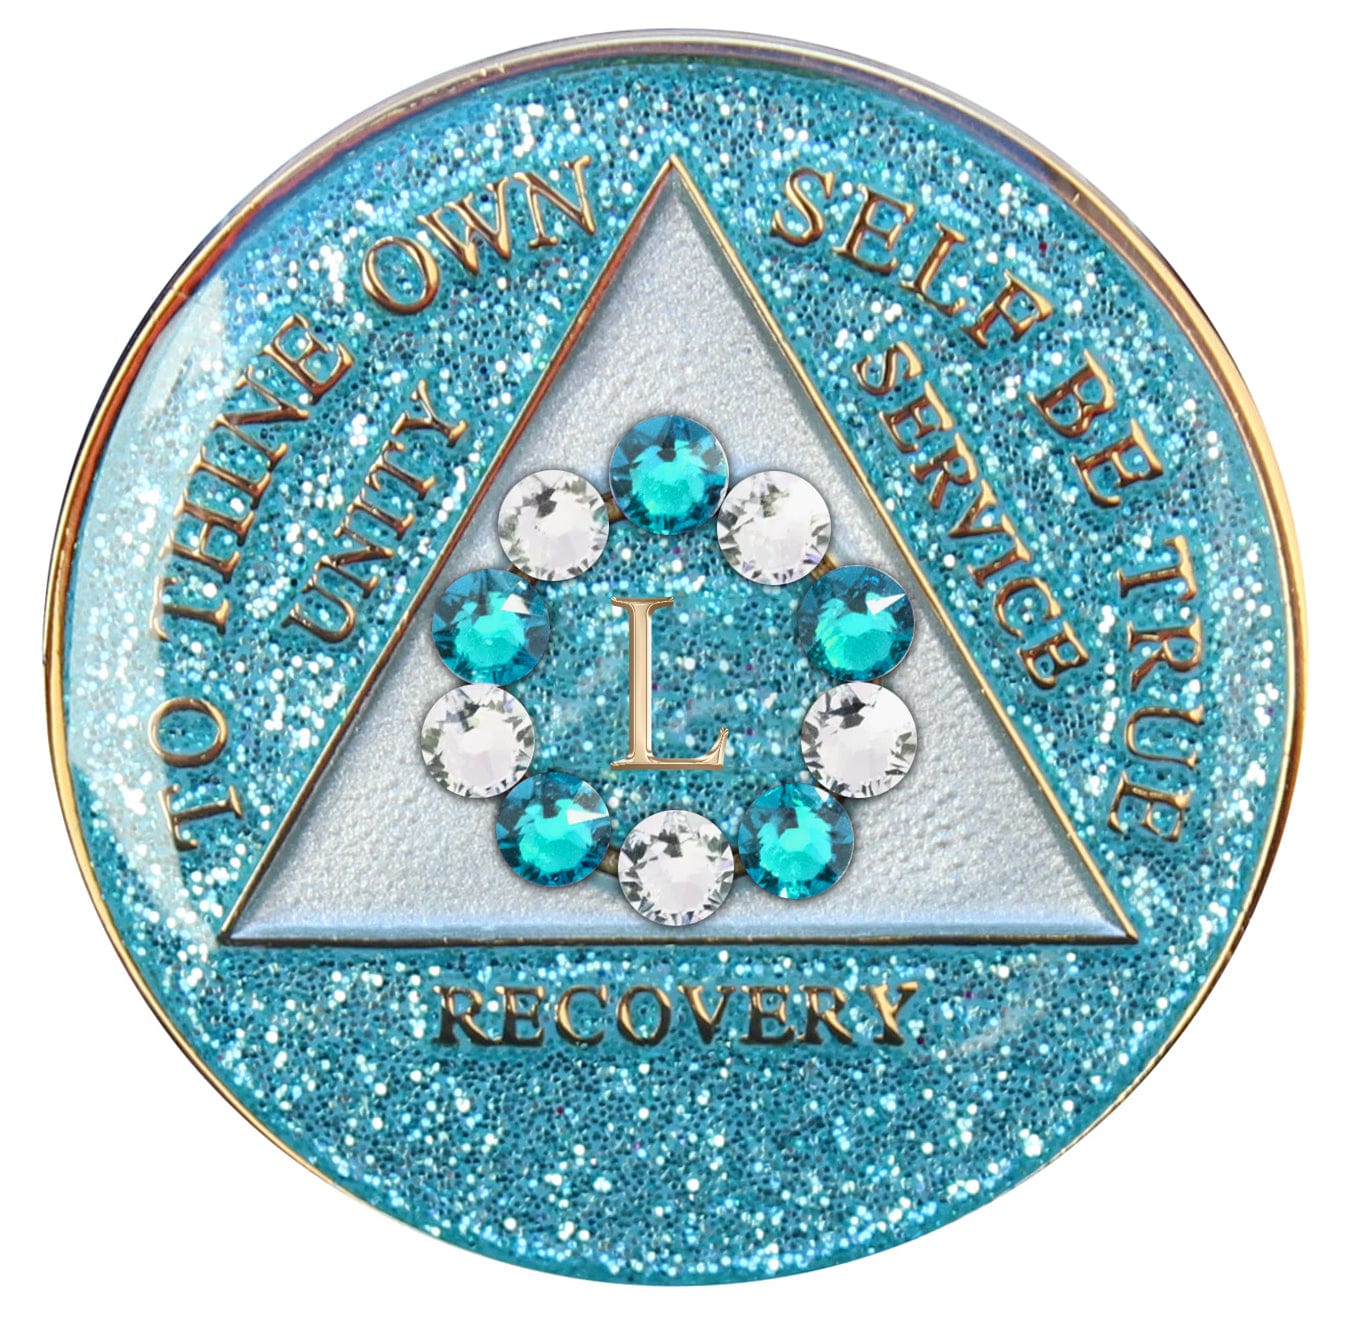 50 Year Deep-sea Aqua glitter 10th step AA medallion with 5 blue genuine crystals and 5 clear genuine crystal, formed in a circle around the year, to thine own self be true, triangle in the center and unity, service, recovery, along with rim of medallion are slightly raised in 14k gold, the center of the triangle is pearl white with the circle being aqua glitter, all emphasizing action and reflection.